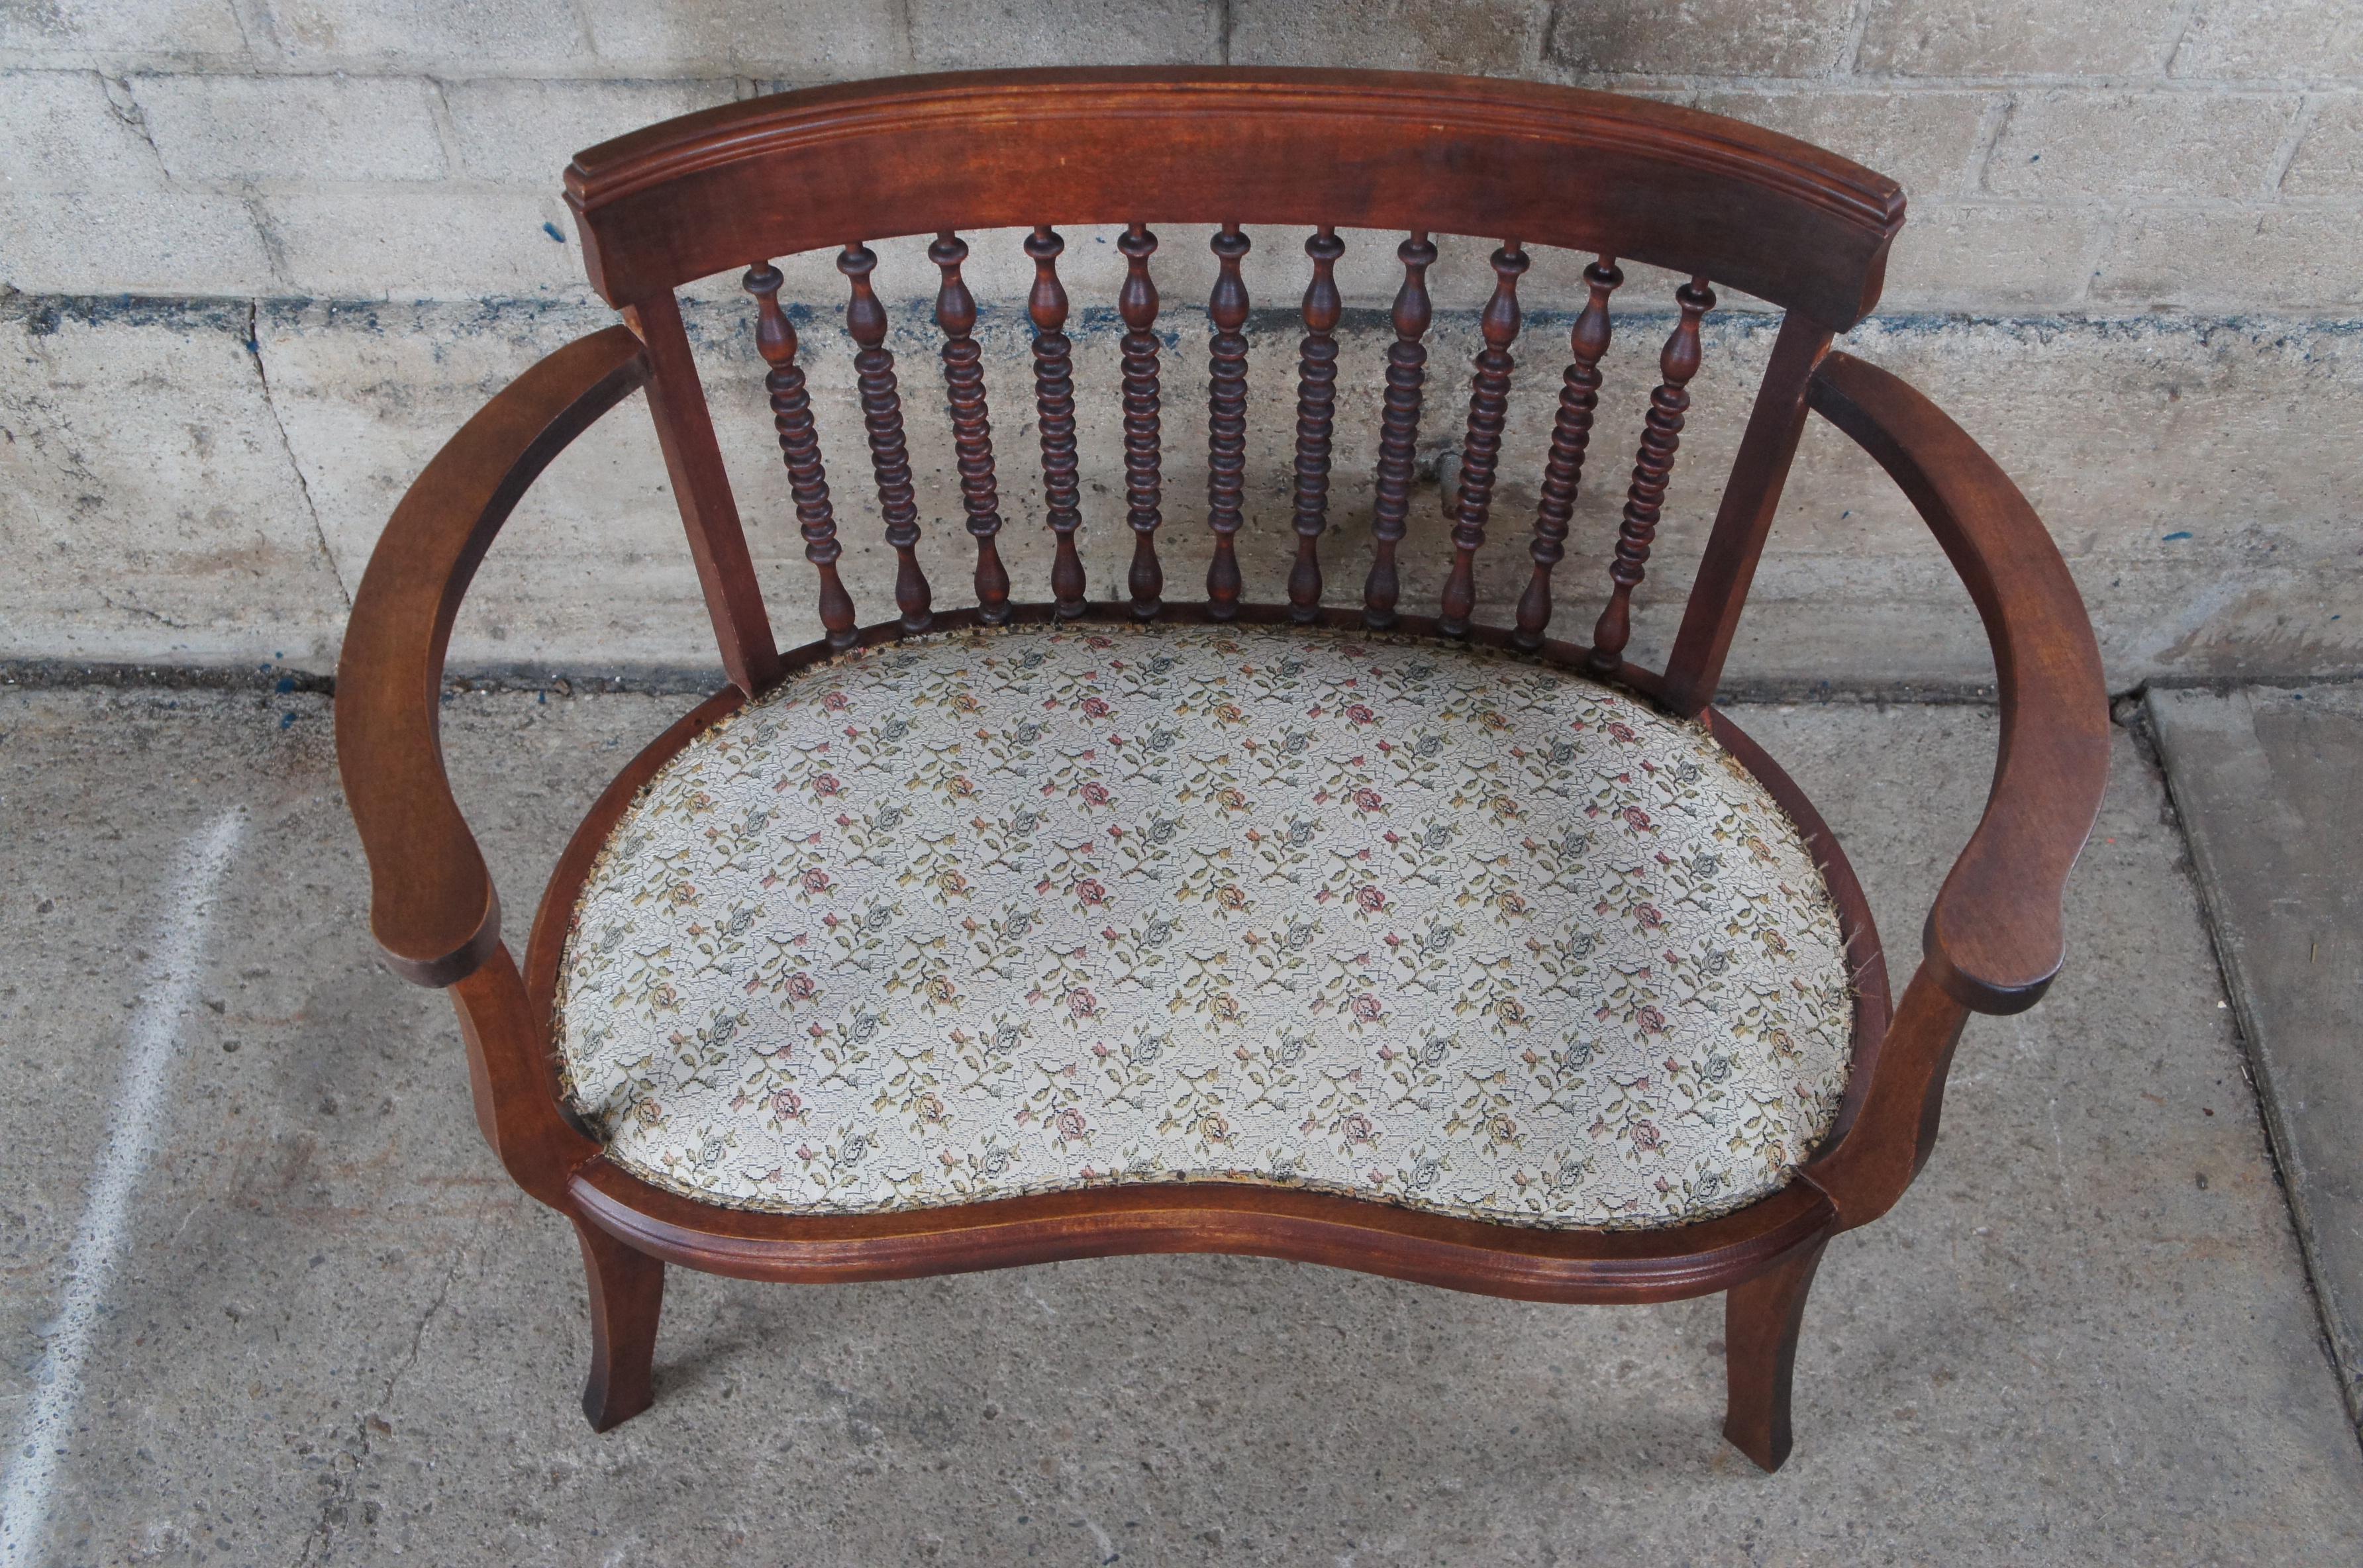 20th Century Antique Edwardian Mahogany Spindled Barrel Back Kidney Shaped Floral Seat Settee